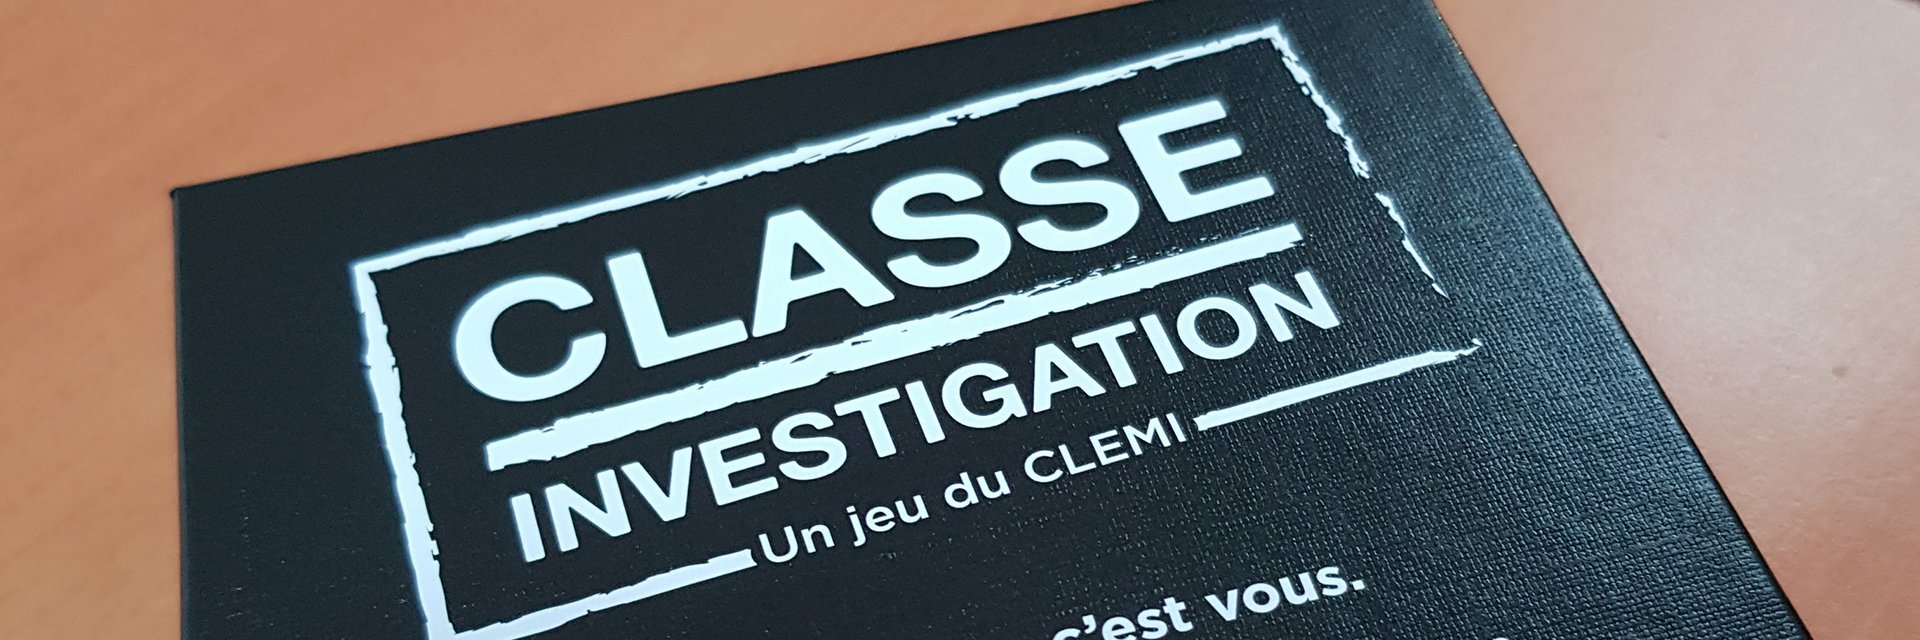 https://www.gmf.fr/files/live/sites/gmf/files/repository/education-nationale/classe-investigation/classe-investigation-lh.jpg